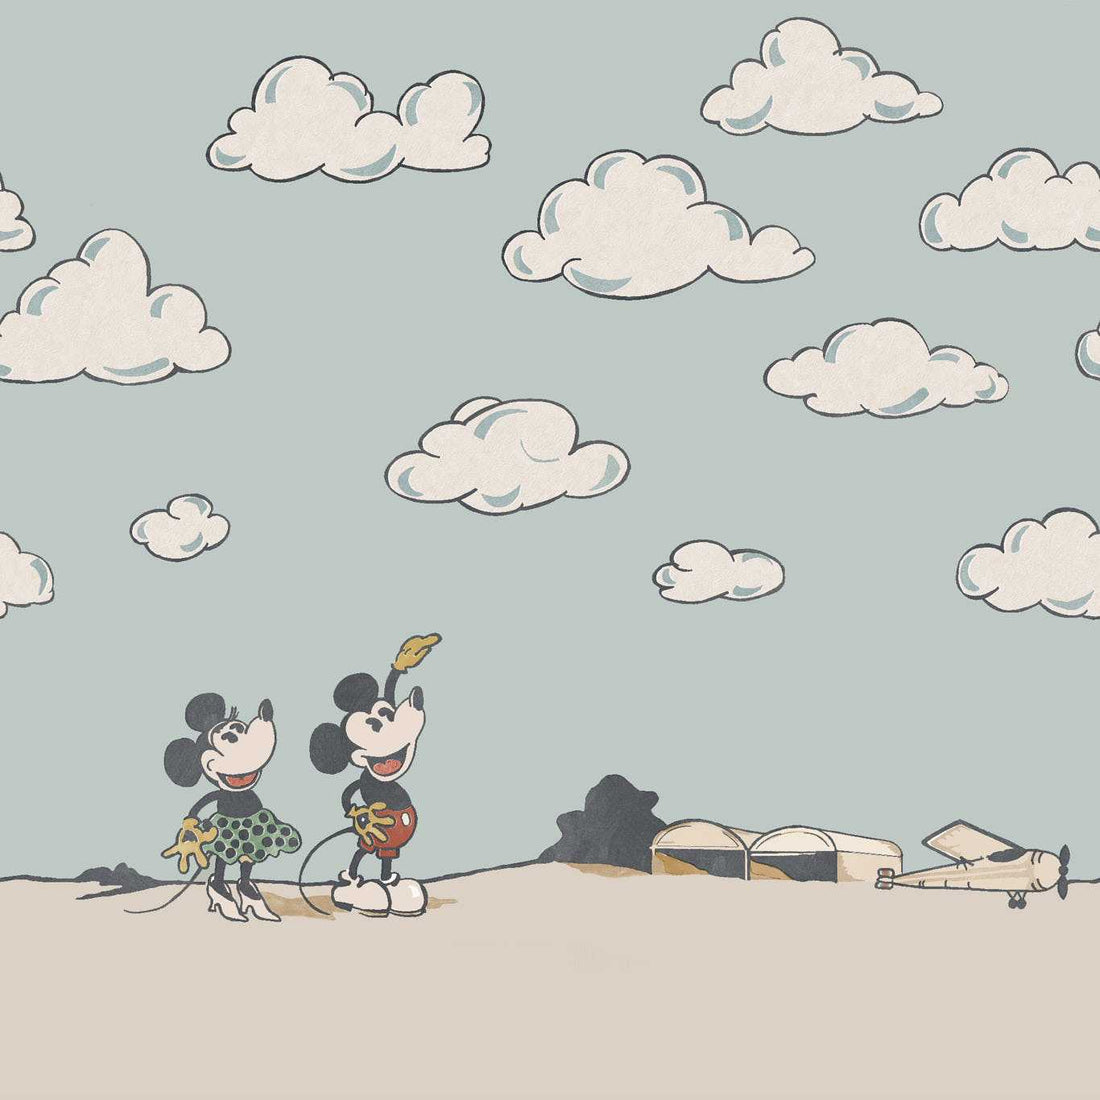 Sanderson x Disney Mickey in the clouds 217292